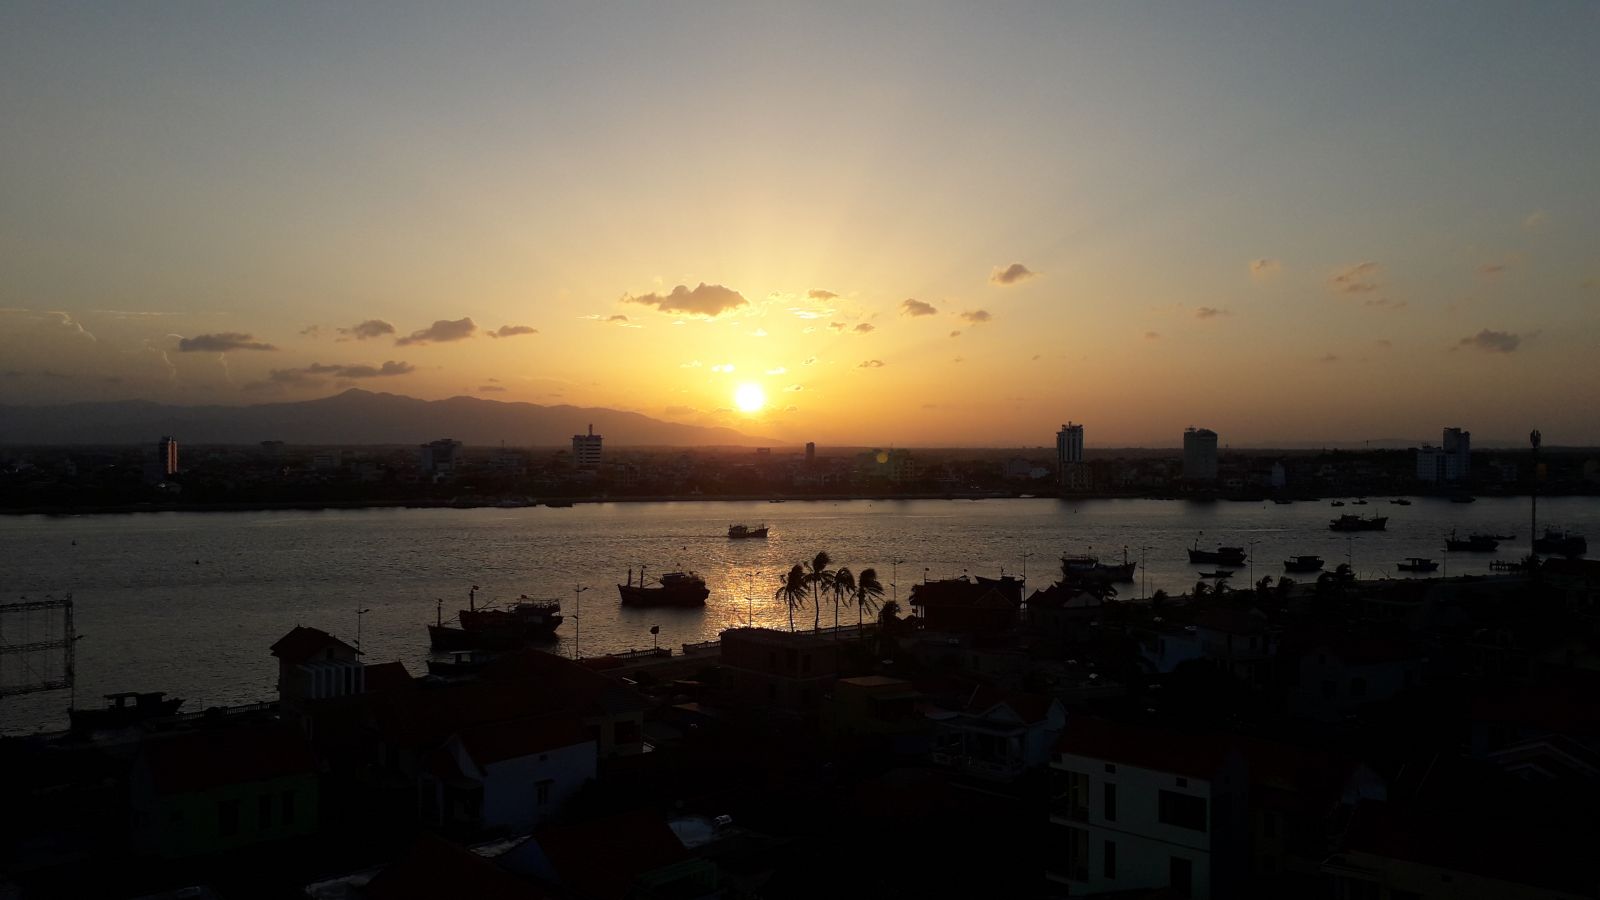 The sunset in Quang Binh